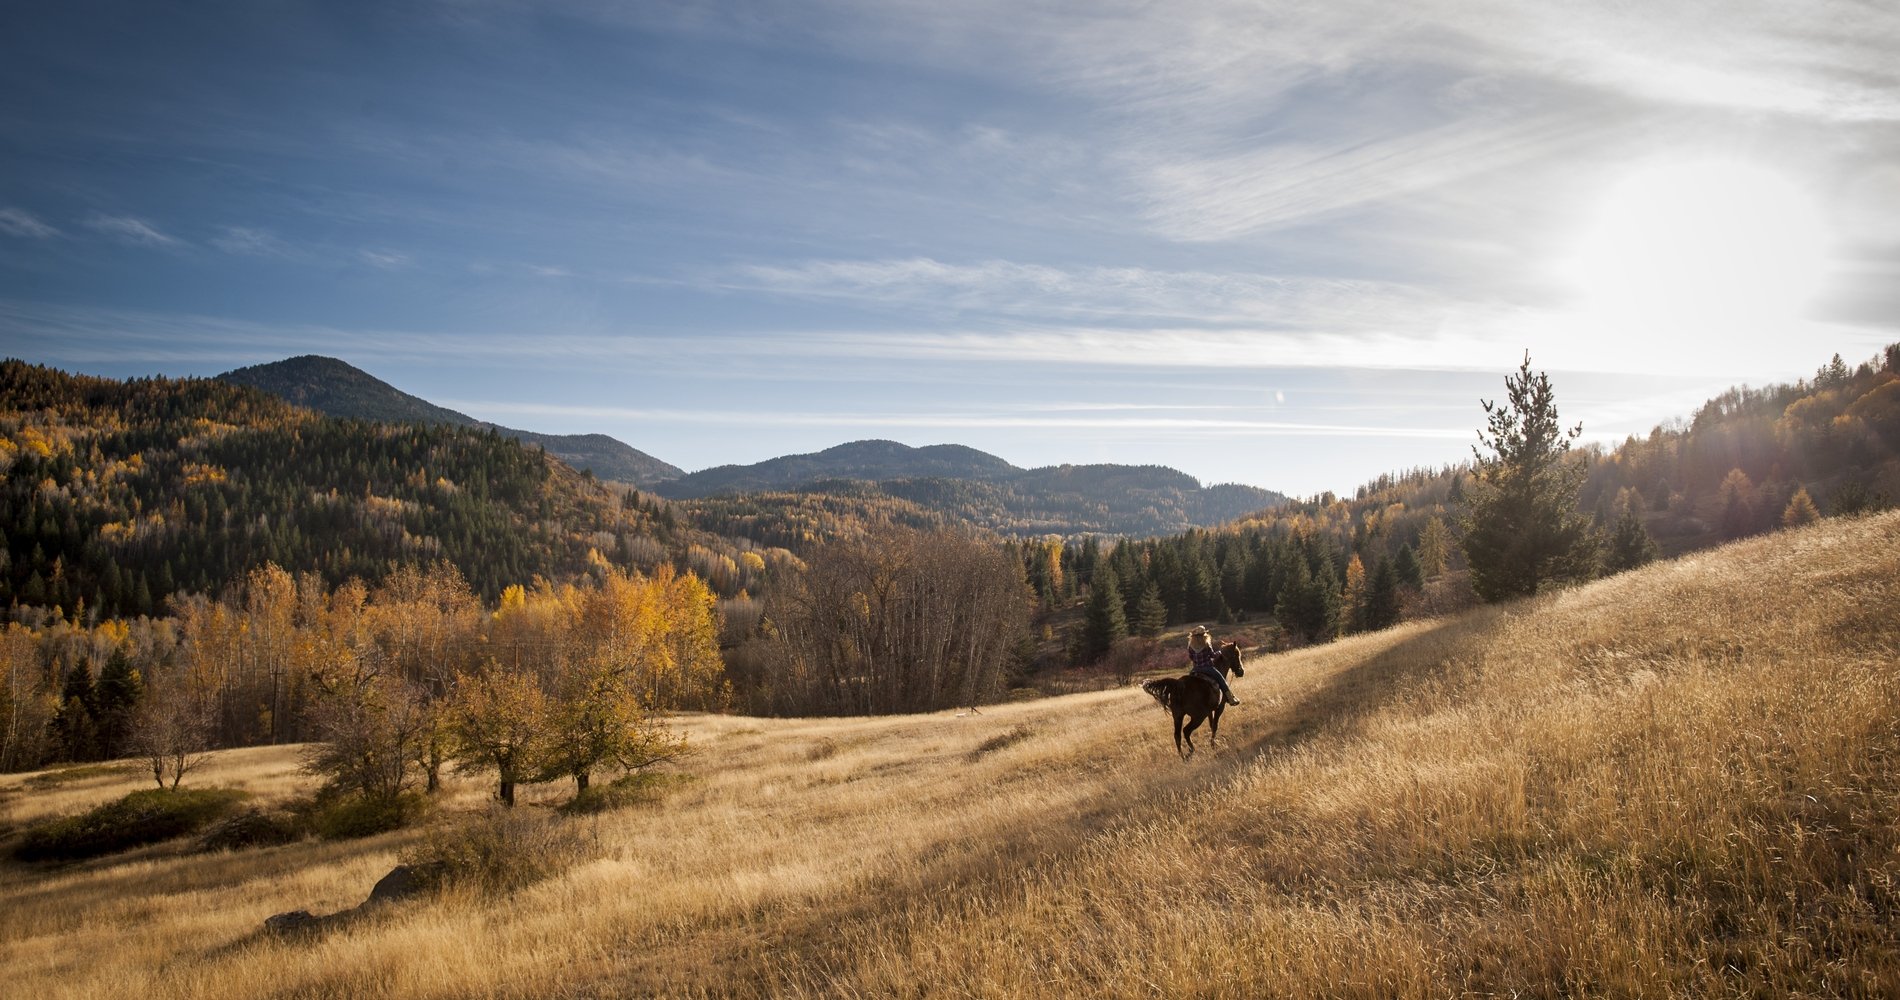 A person is horseback riding through a grassy field in the fall in Rossland